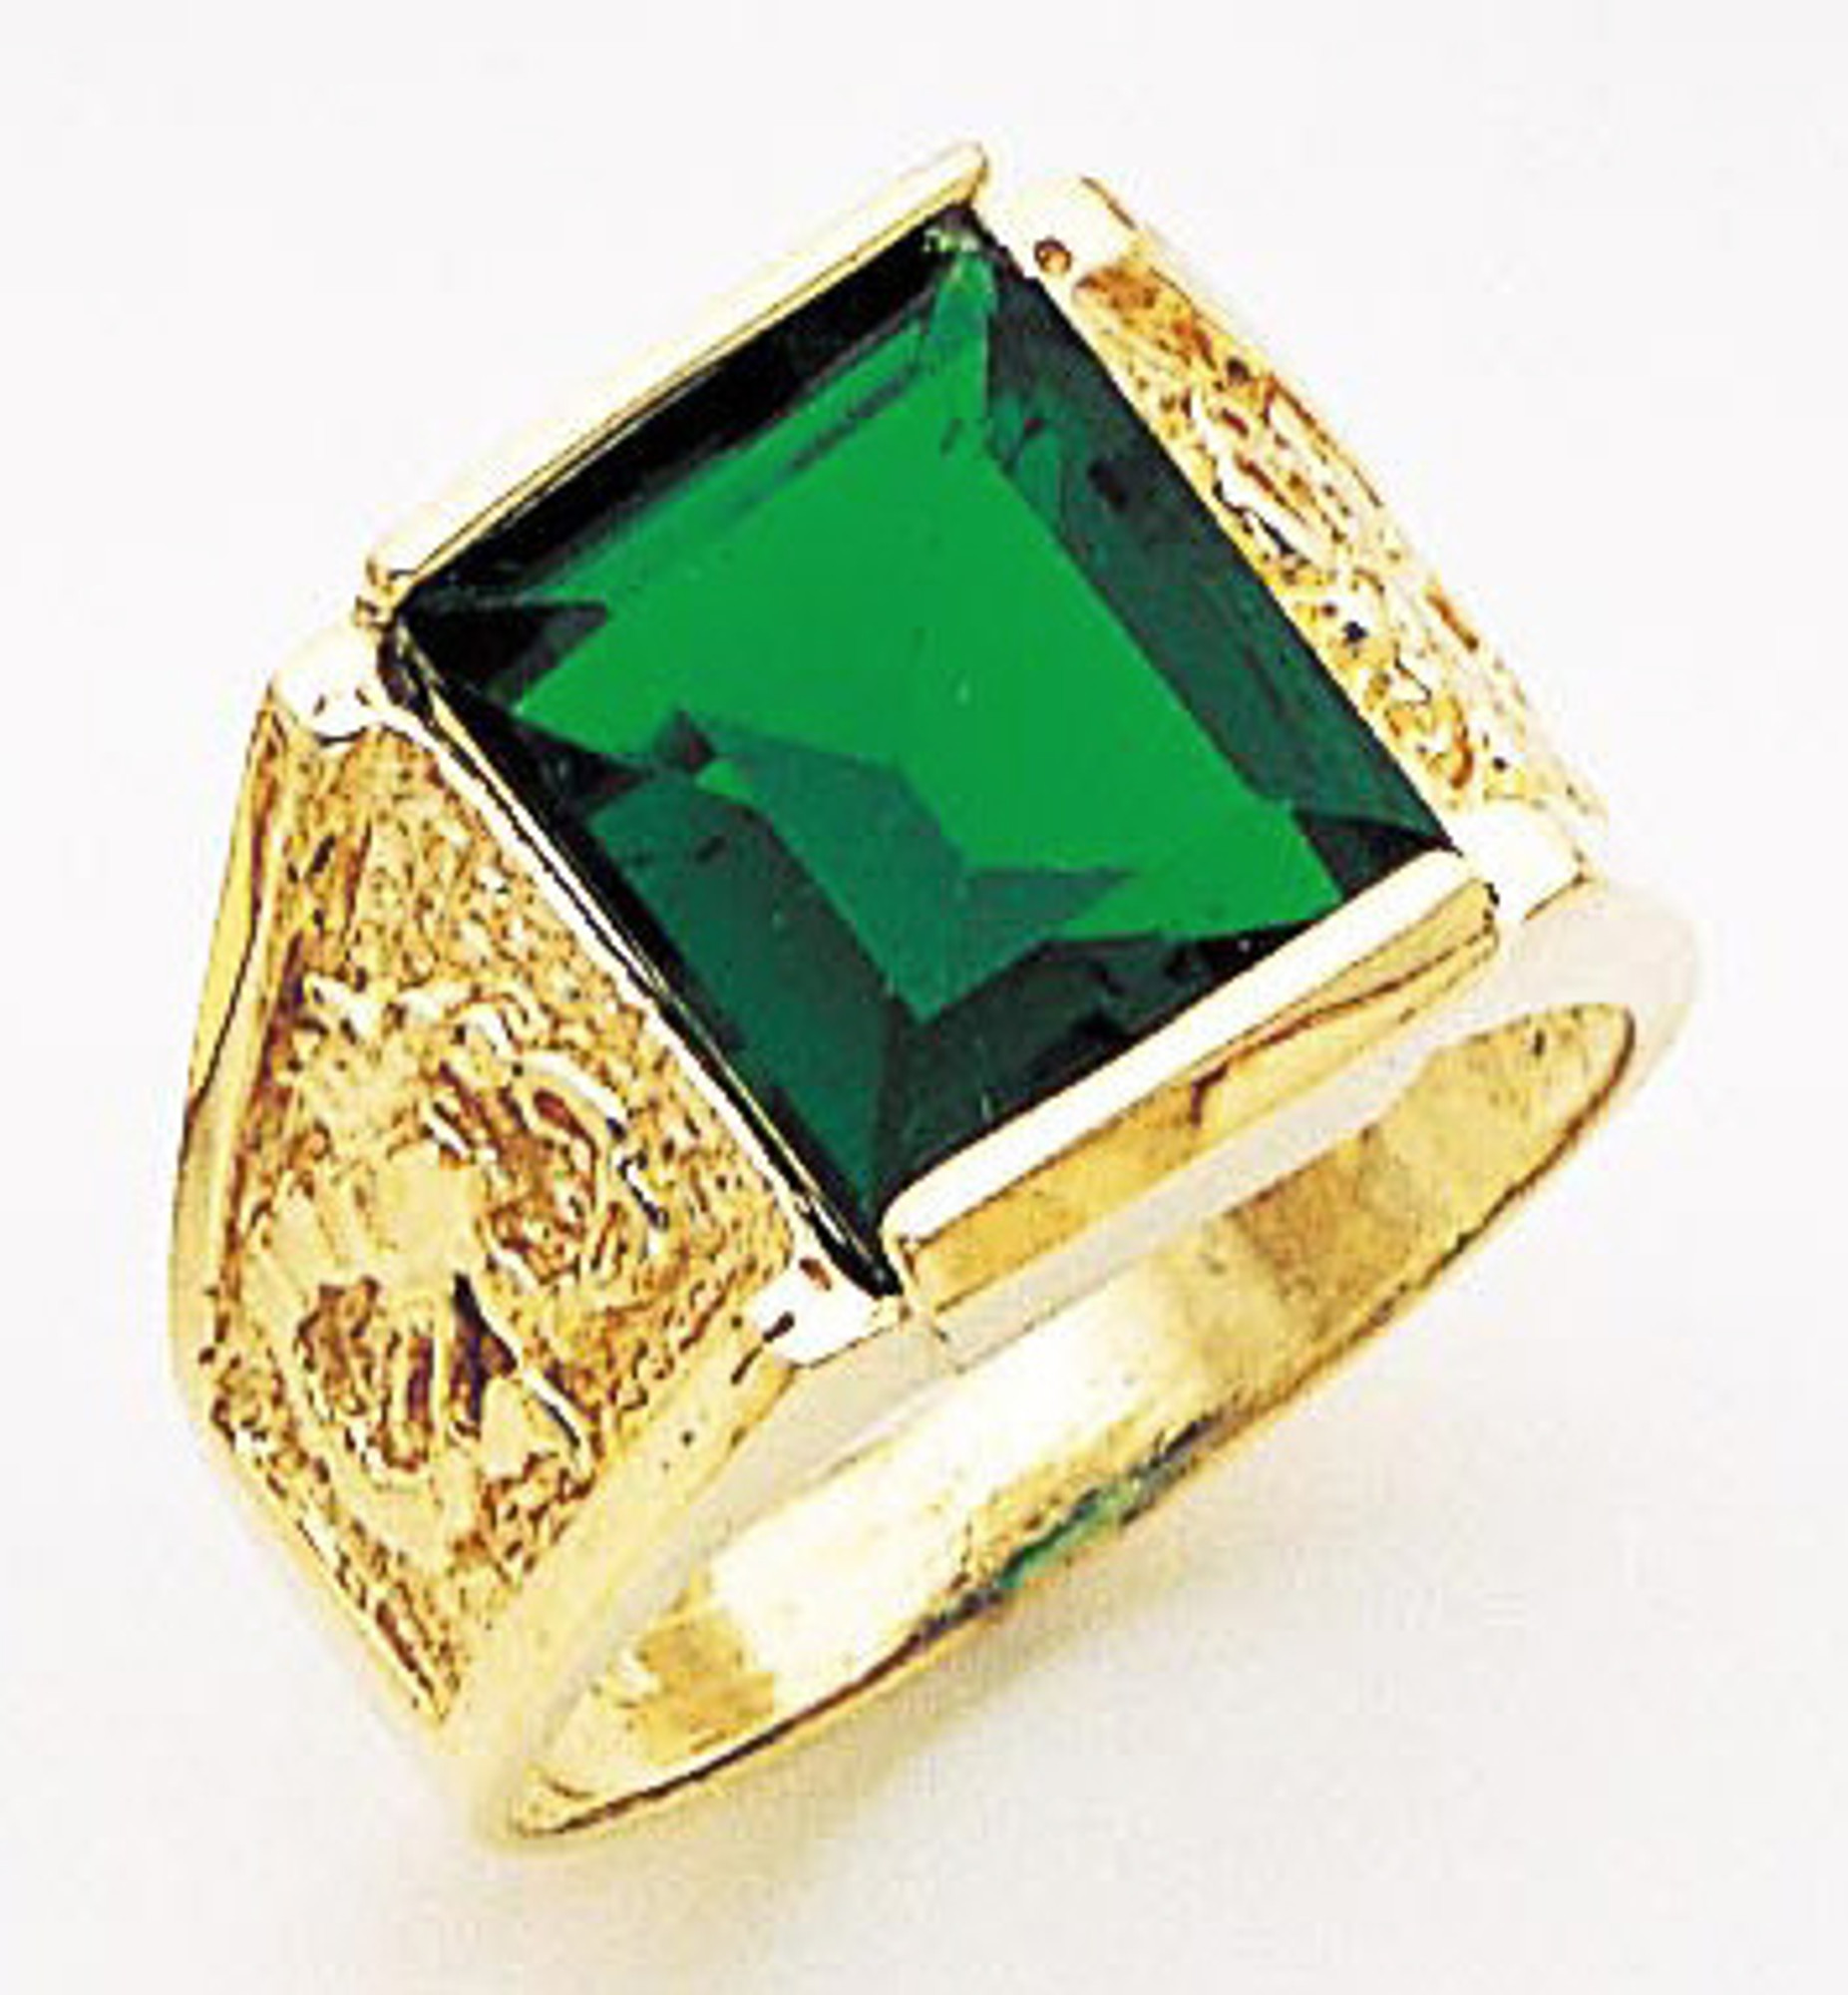 Square Emerald Men's Ring in Sterling Silver|Cindy Men's Ring with Princess Cut Emerald